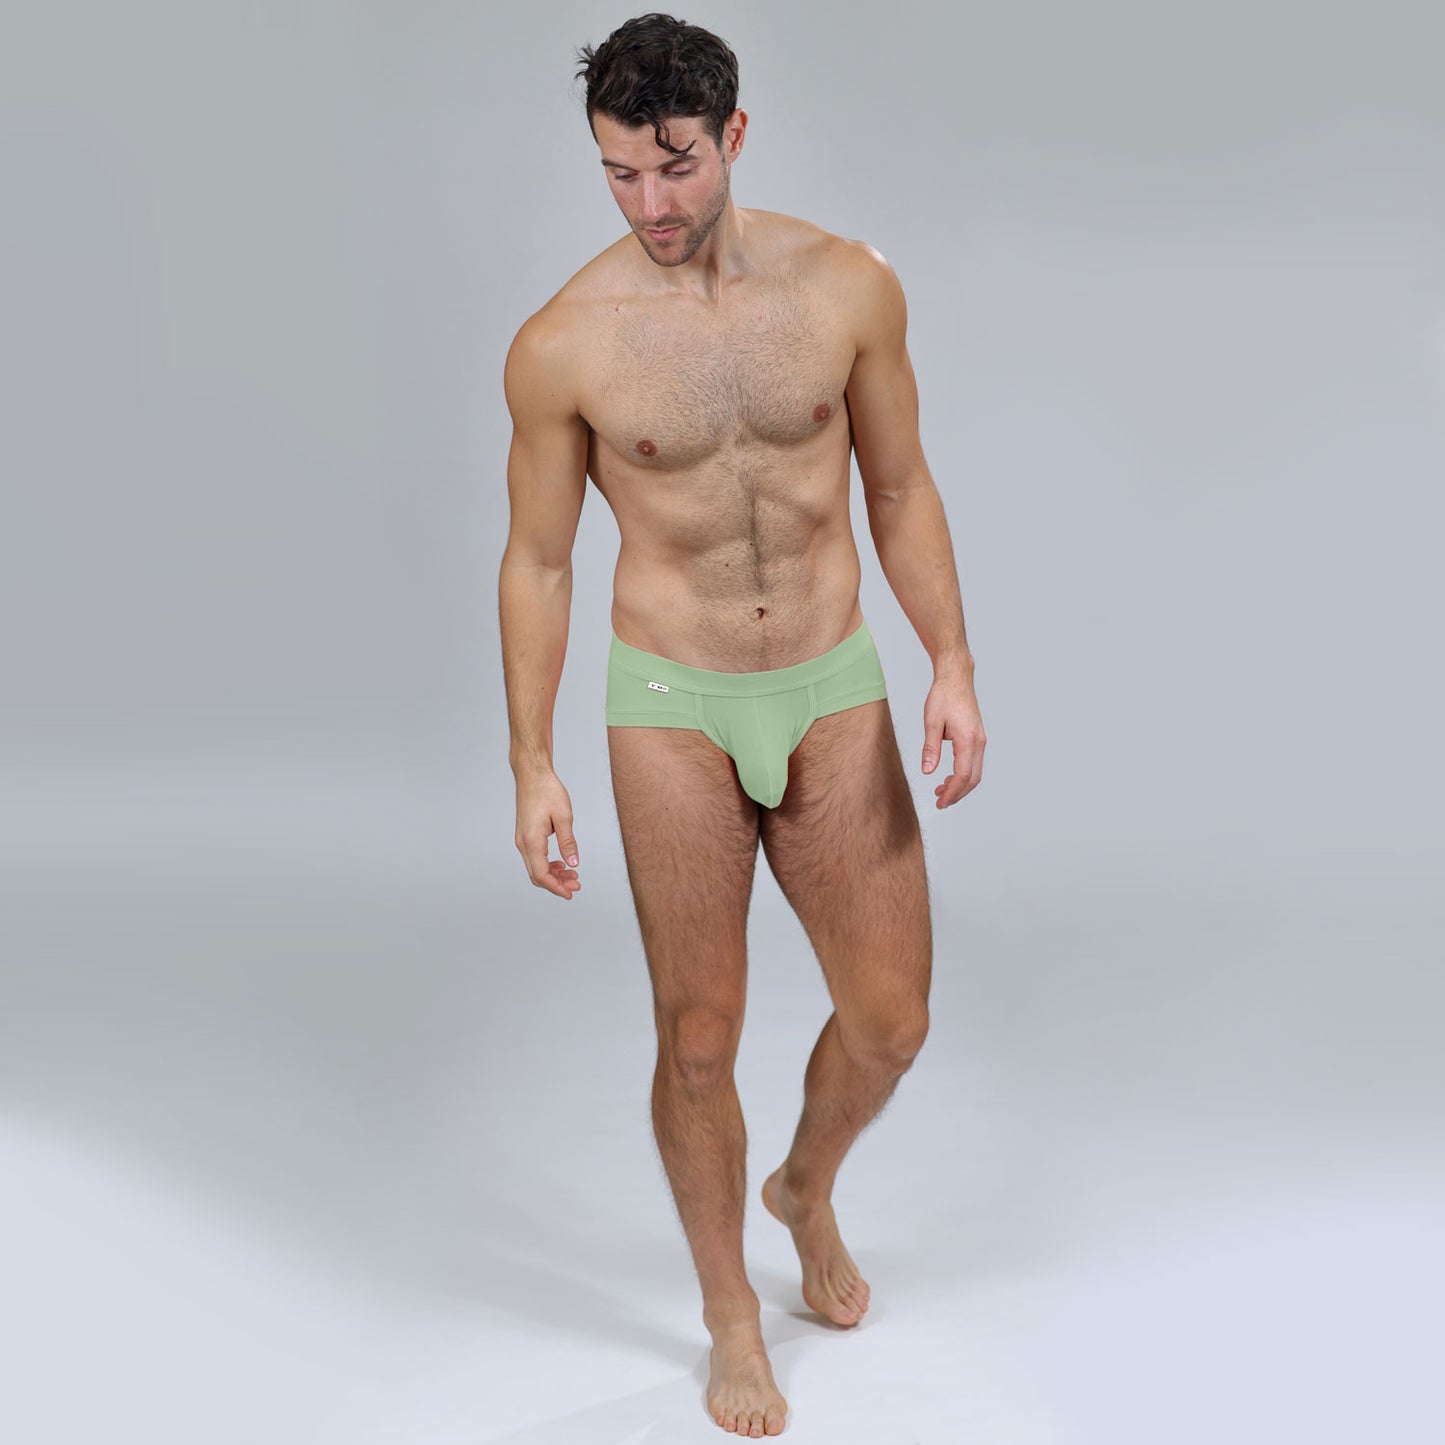 The Limited Edition Mint Green Brief for men in the USA and Canada